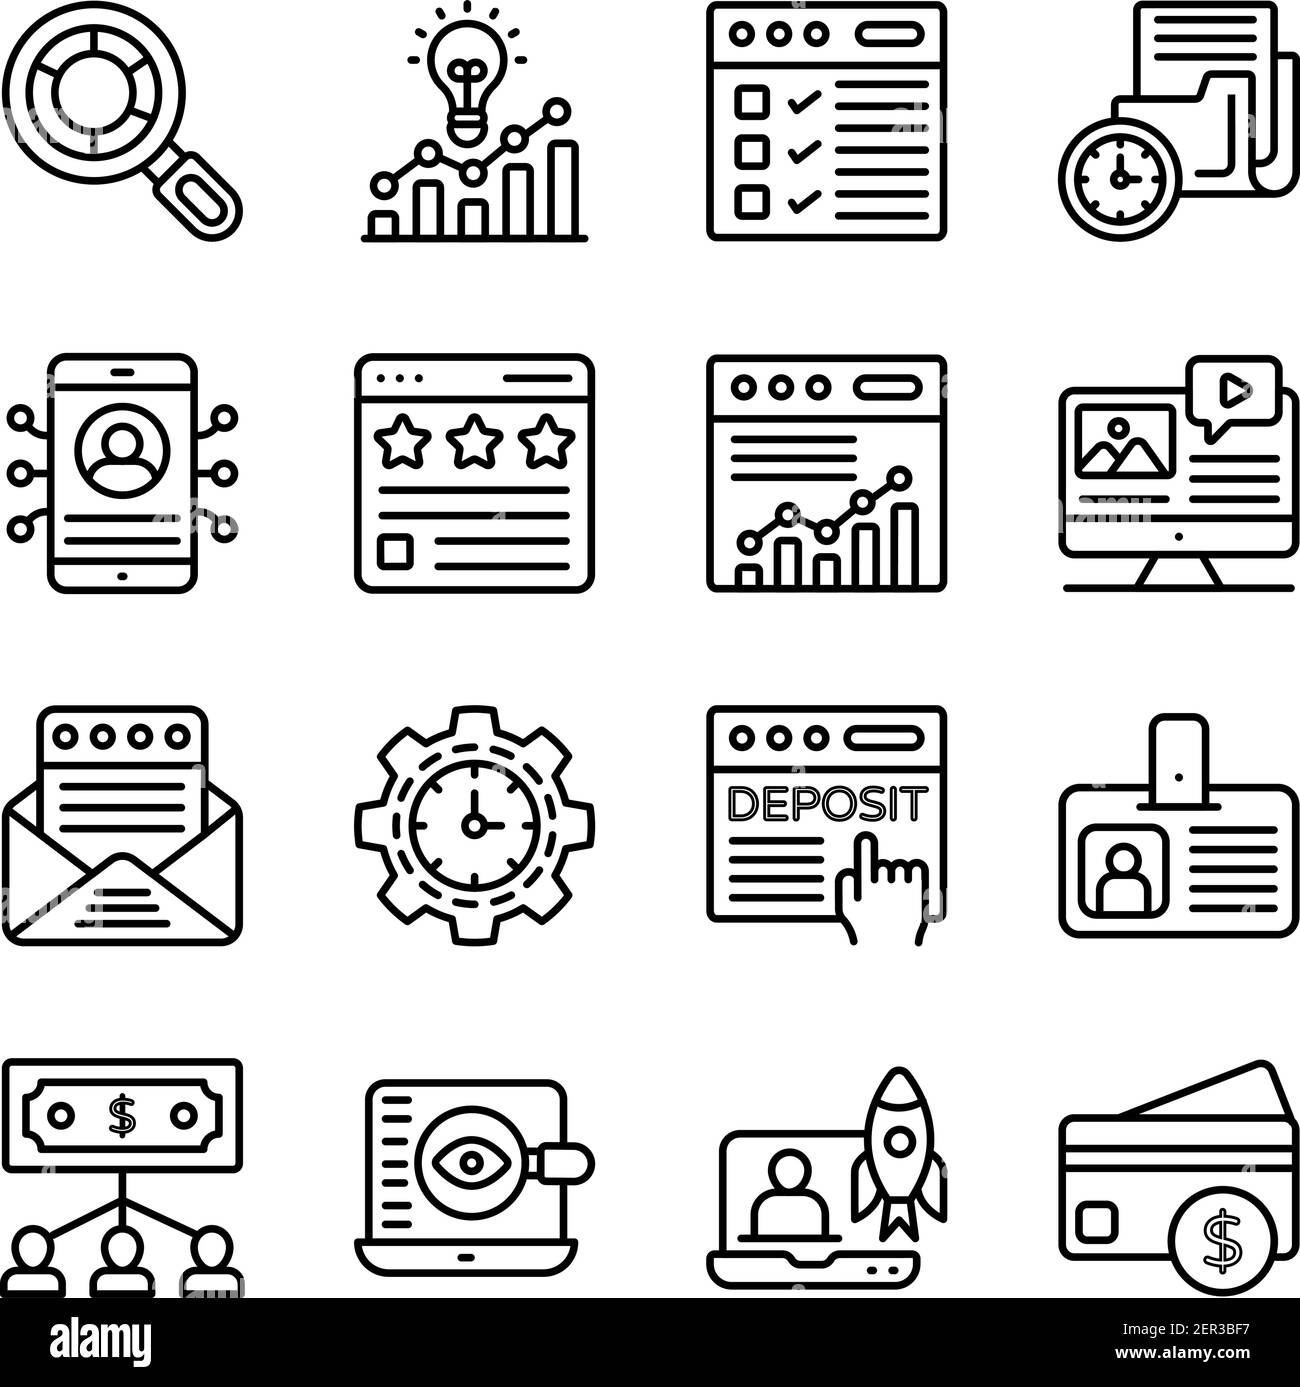 Business and Data Analytics Linear Icons Pack Illustration de Vecteur